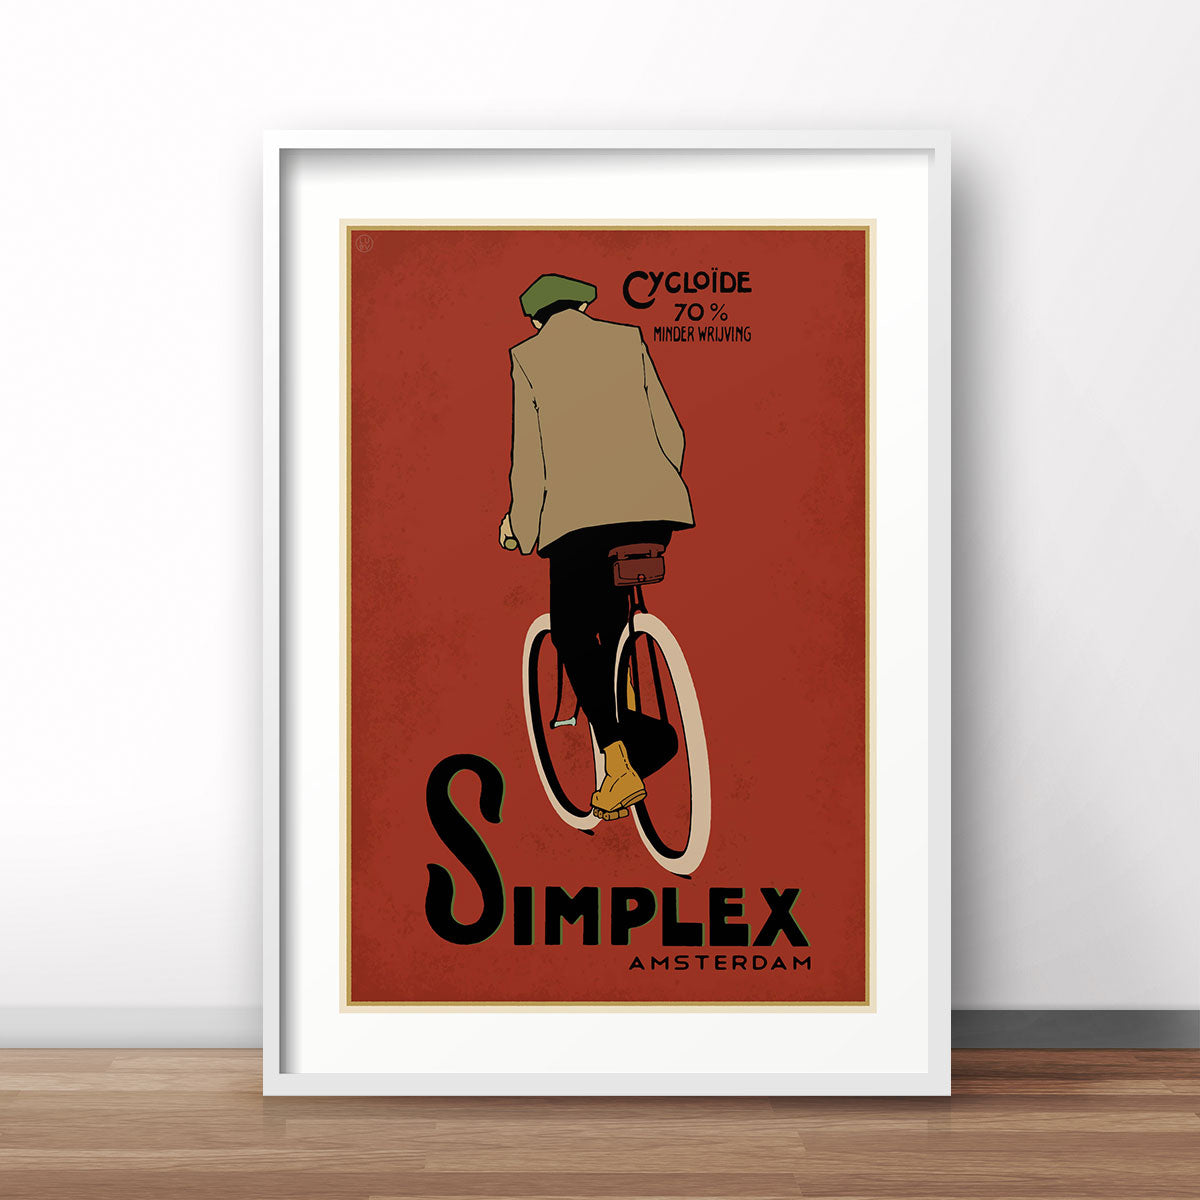 Simplex Cycles Amsterdam vintage retro advertising poster - Places We Luv